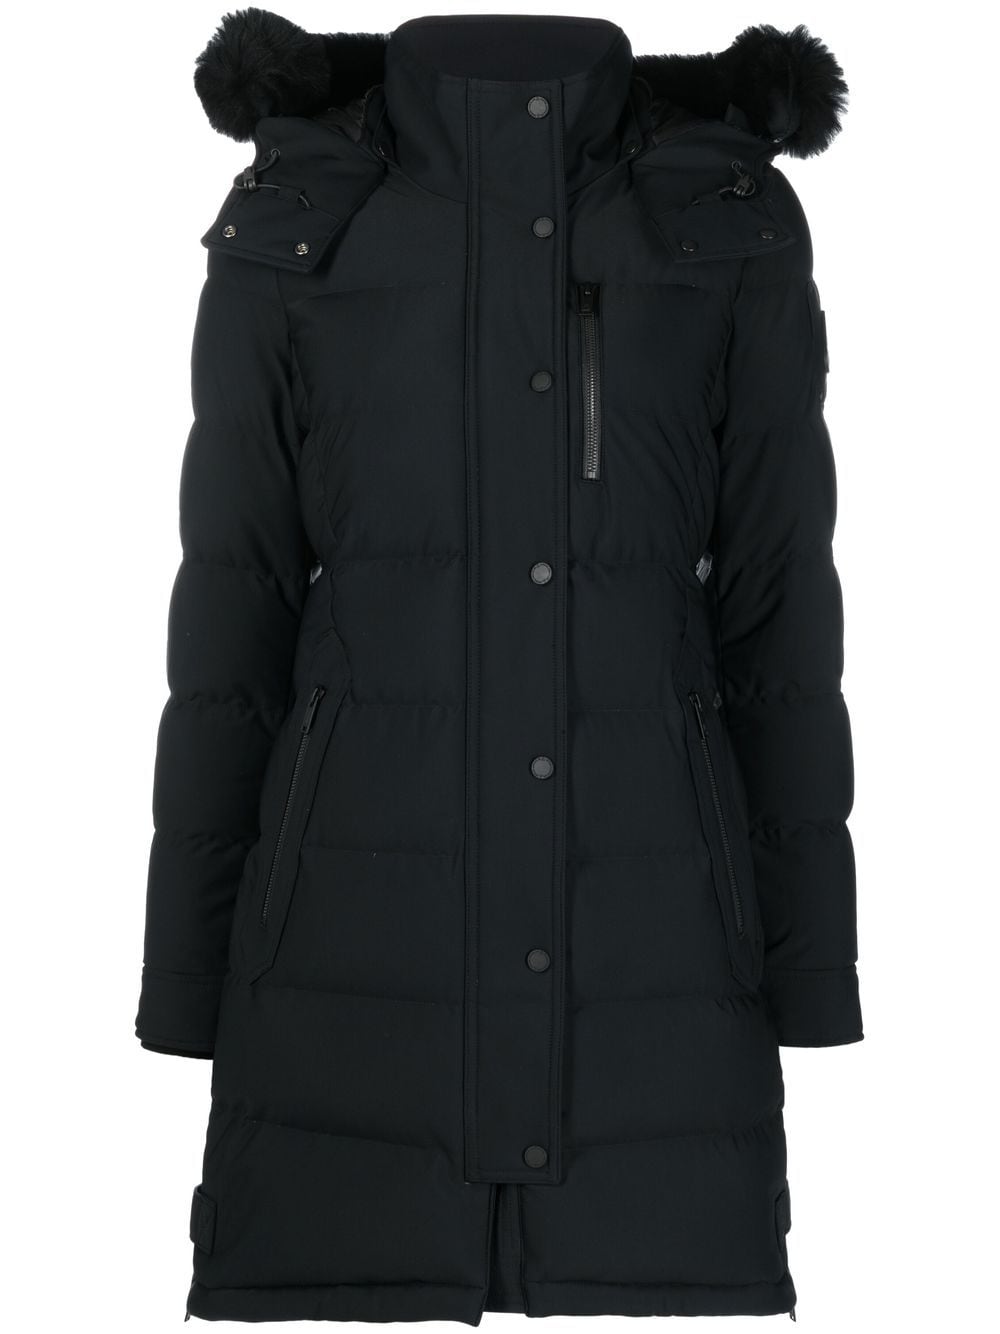 Watershed hooded parka coat